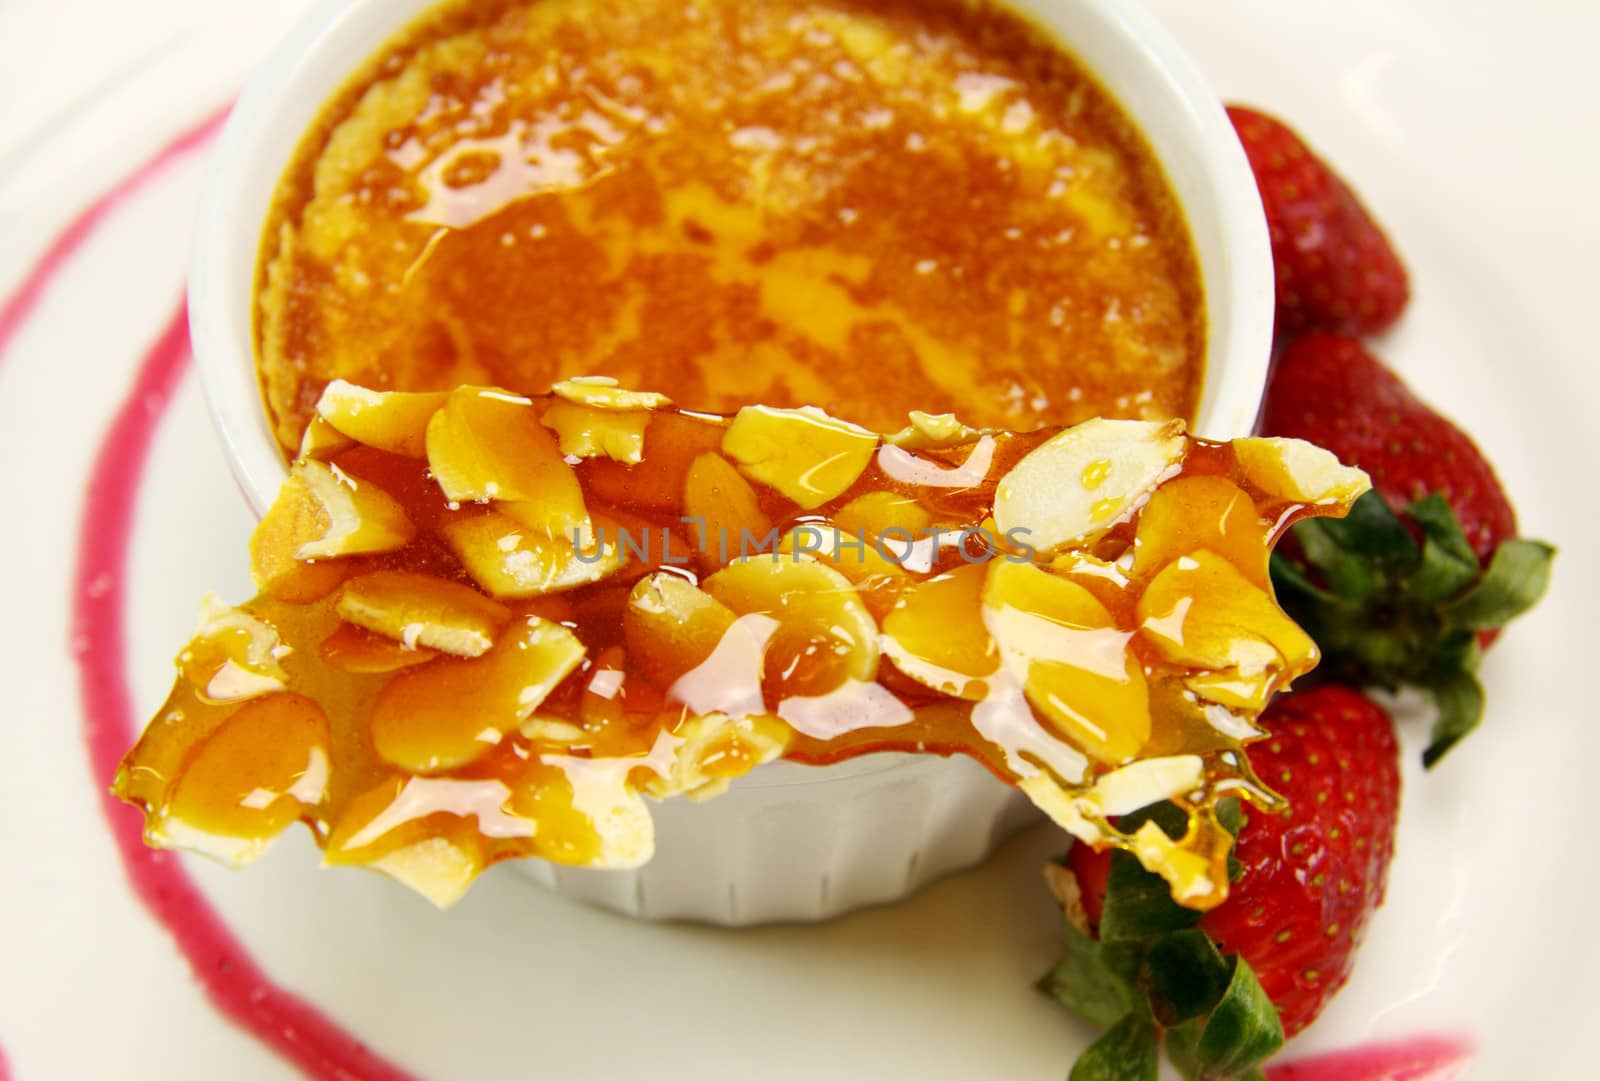 Delicious almond praline and baked custard with fresh strawberries.